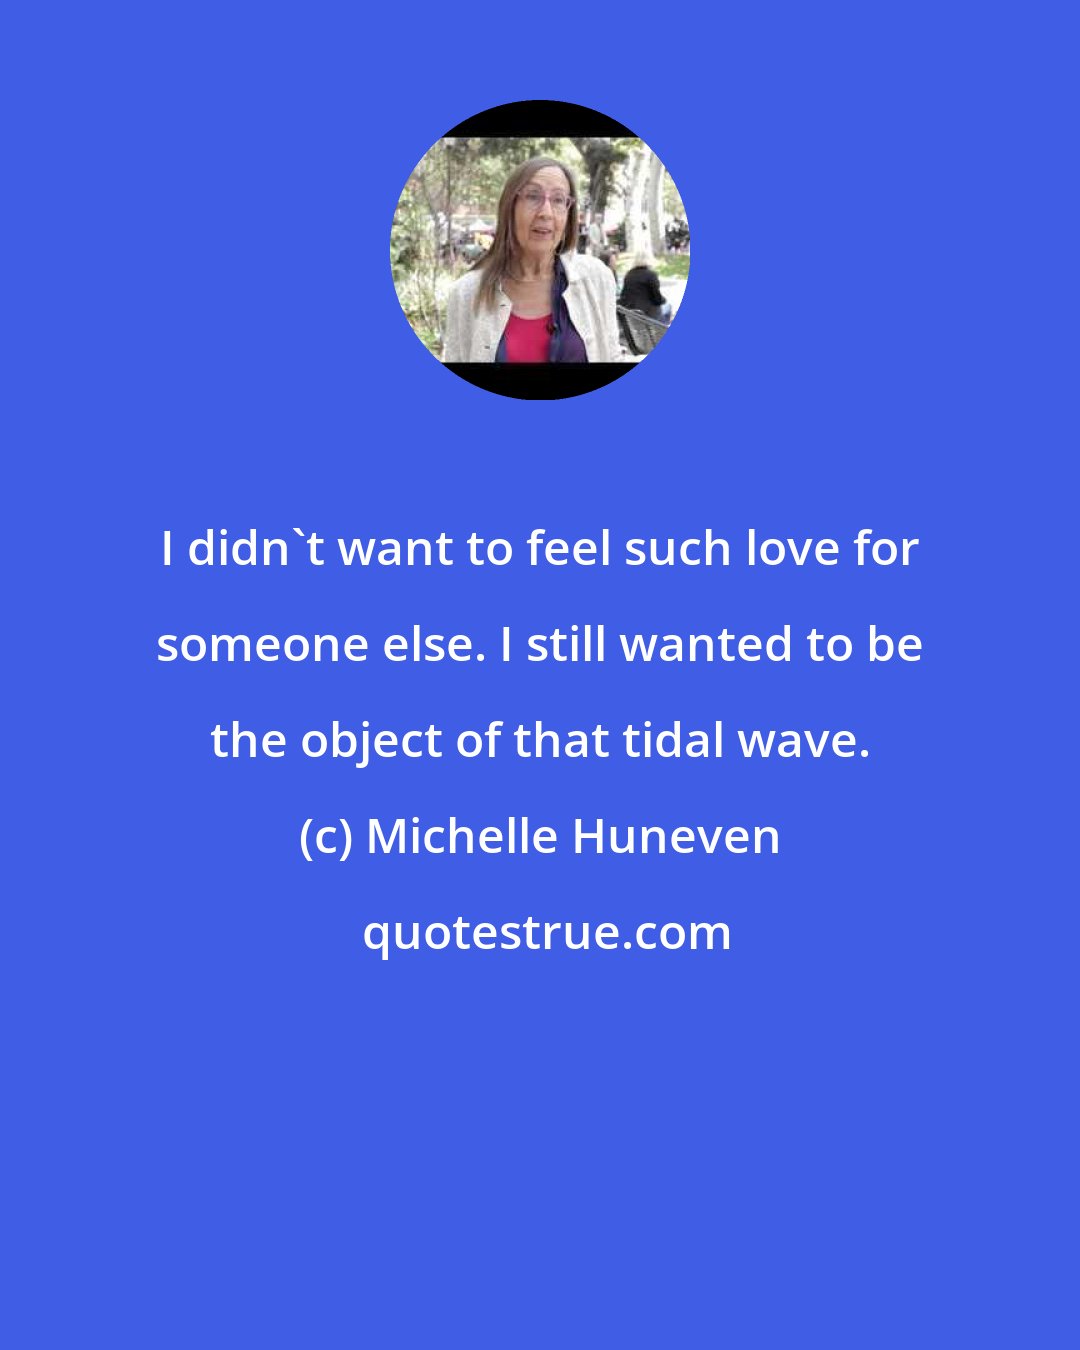 Michelle Huneven: I didn't want to feel such love for someone else. I still wanted to be the object of that tidal wave.